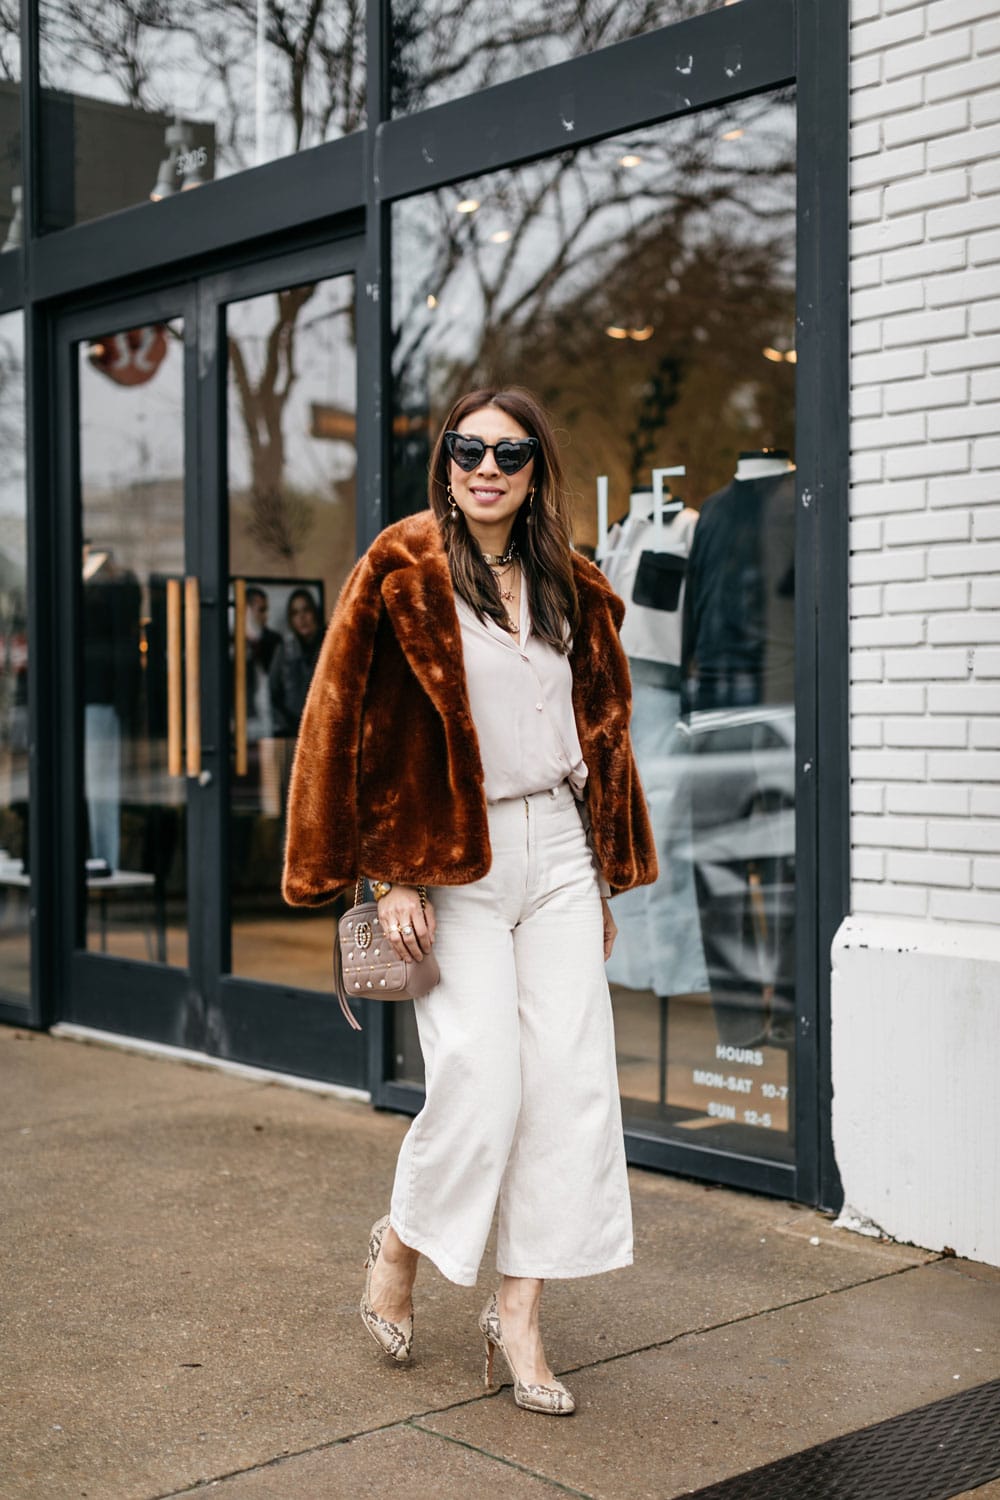 style of sam in faux wrap top winter white outfit, brown faux fur jacket, heart shaped sunglasses, no pink or red valentine's day outfit